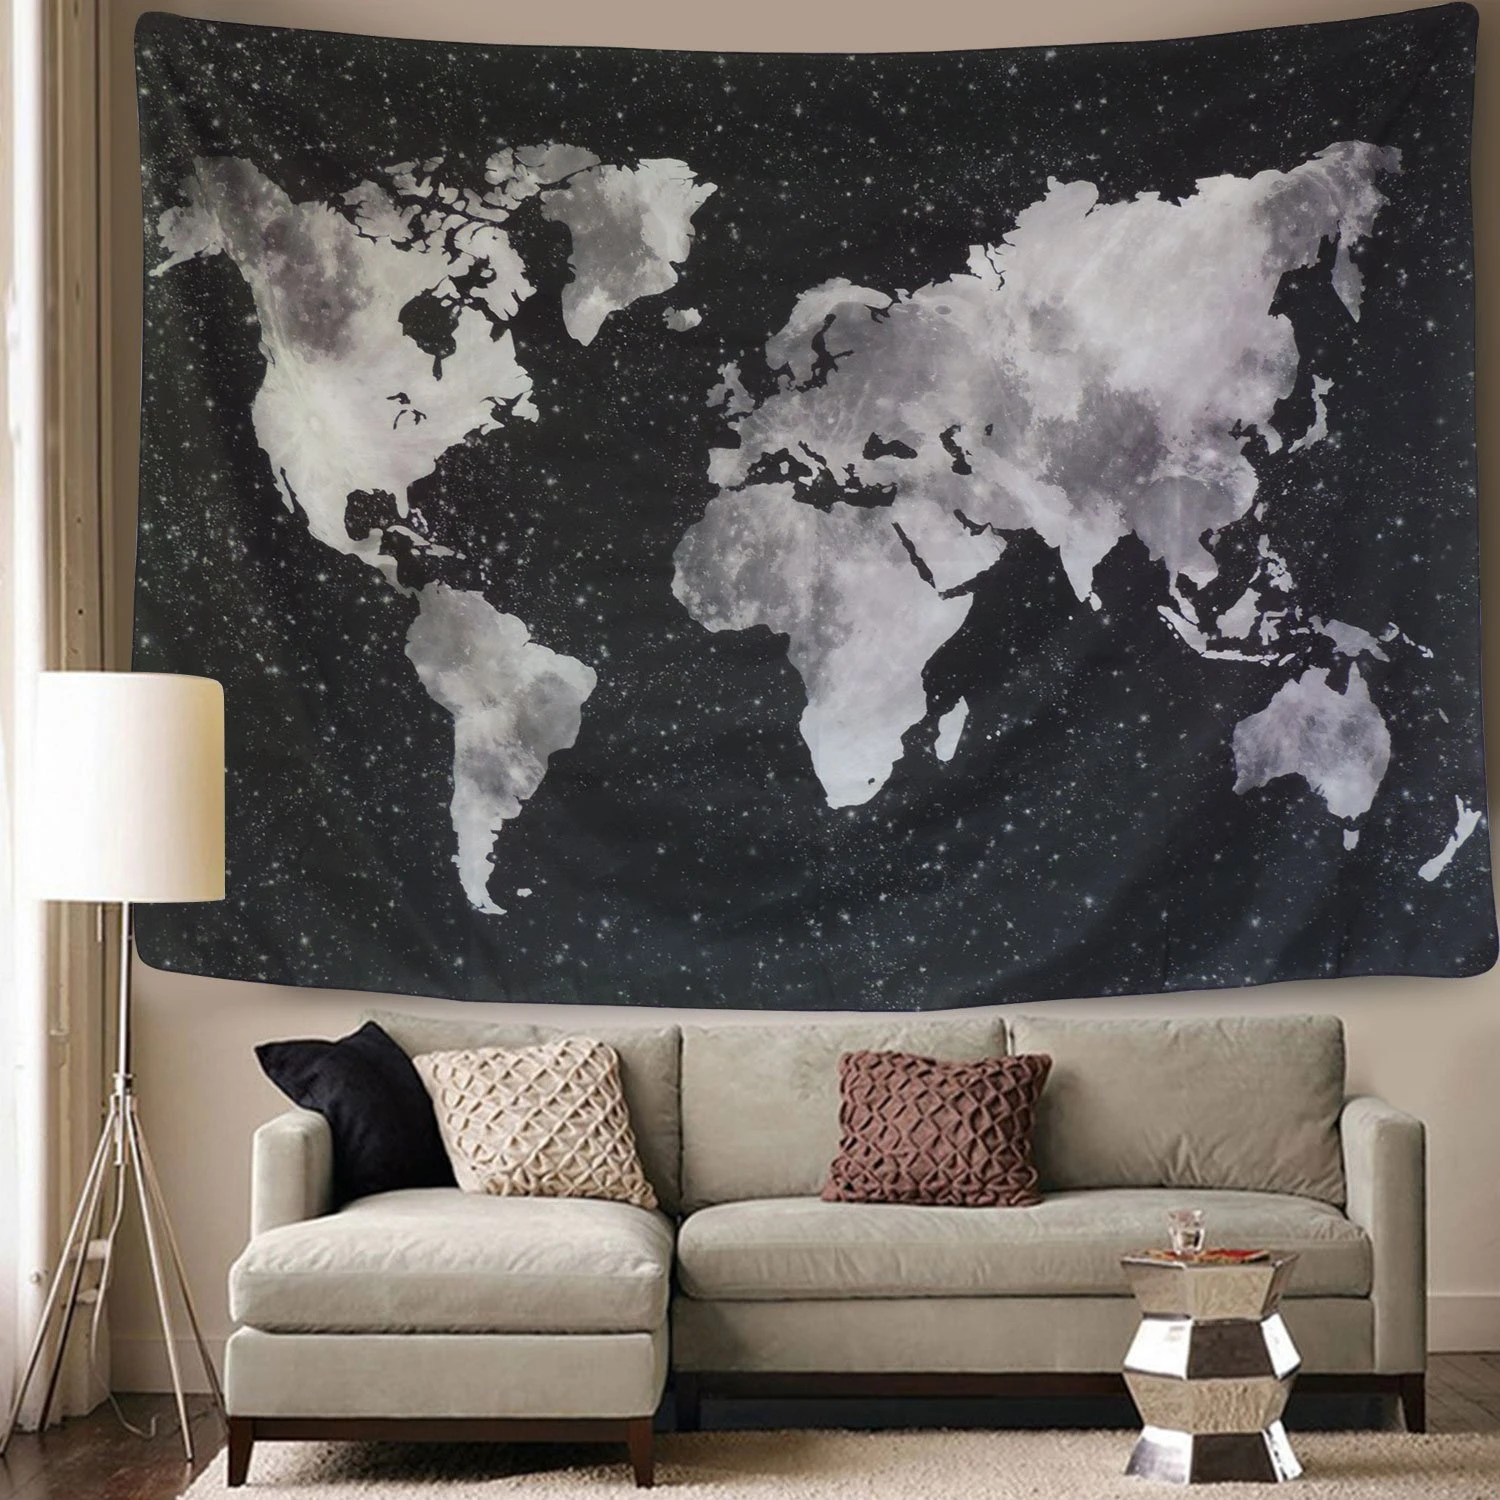 Cartoon World Map Tapestry Wall Hanging Art Background Maps Kids Room  Decoration | Tapestry Art Design World Map Tapestry Decor Living Room Art  150x200 Cm 